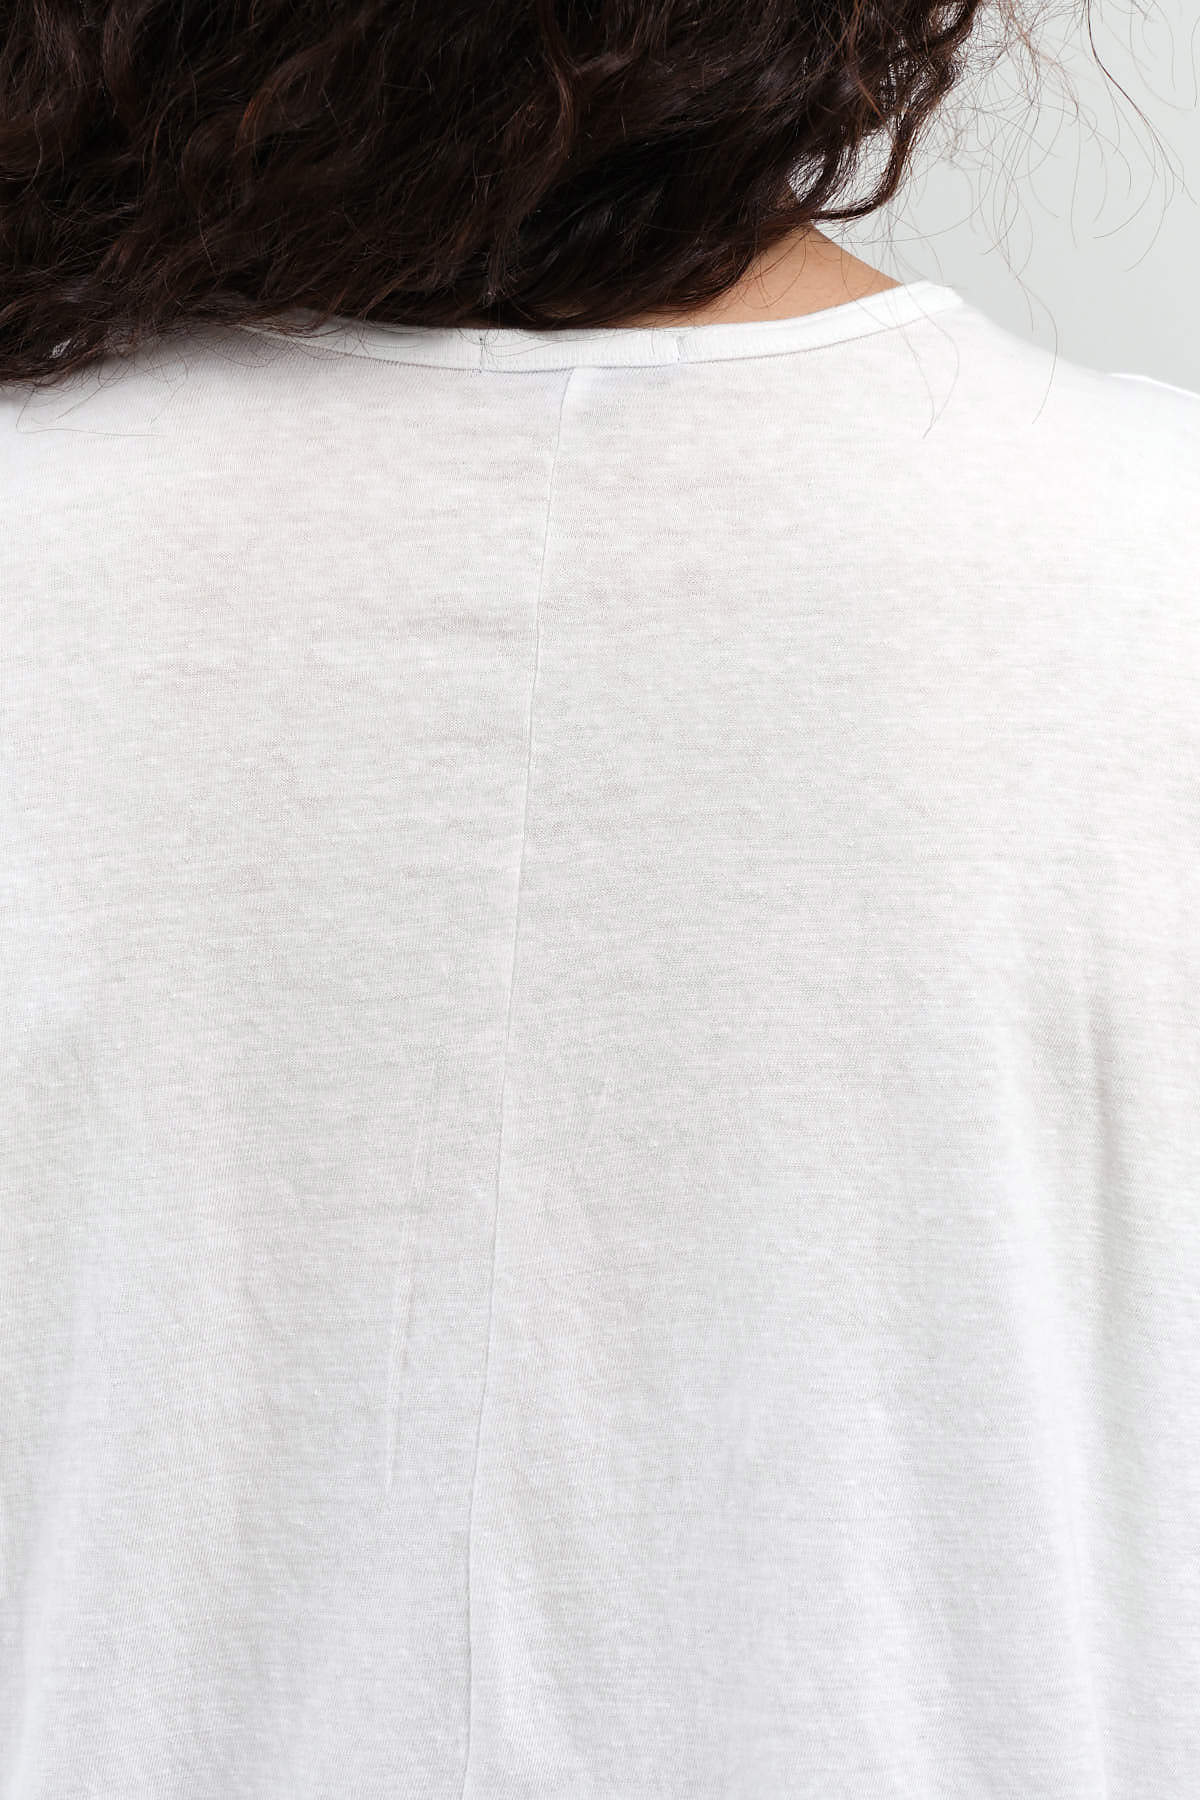 Back collar view of Cotton Jersey Crew Neck T-Shirt in White